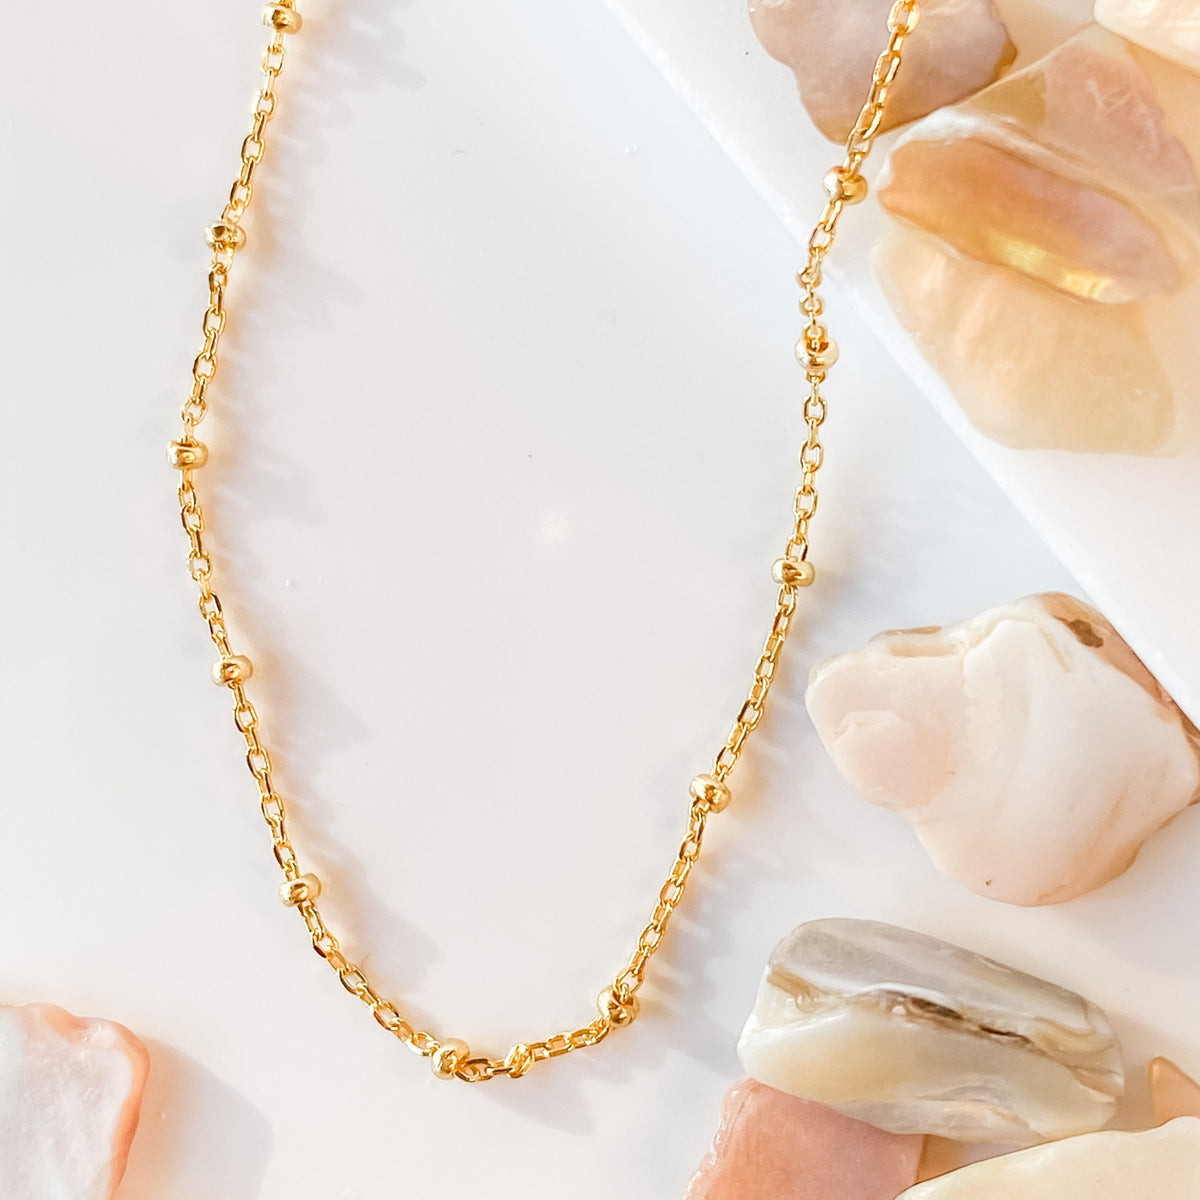 Kori Gold Filled Chain Anklet-waterproof – Lizzy James